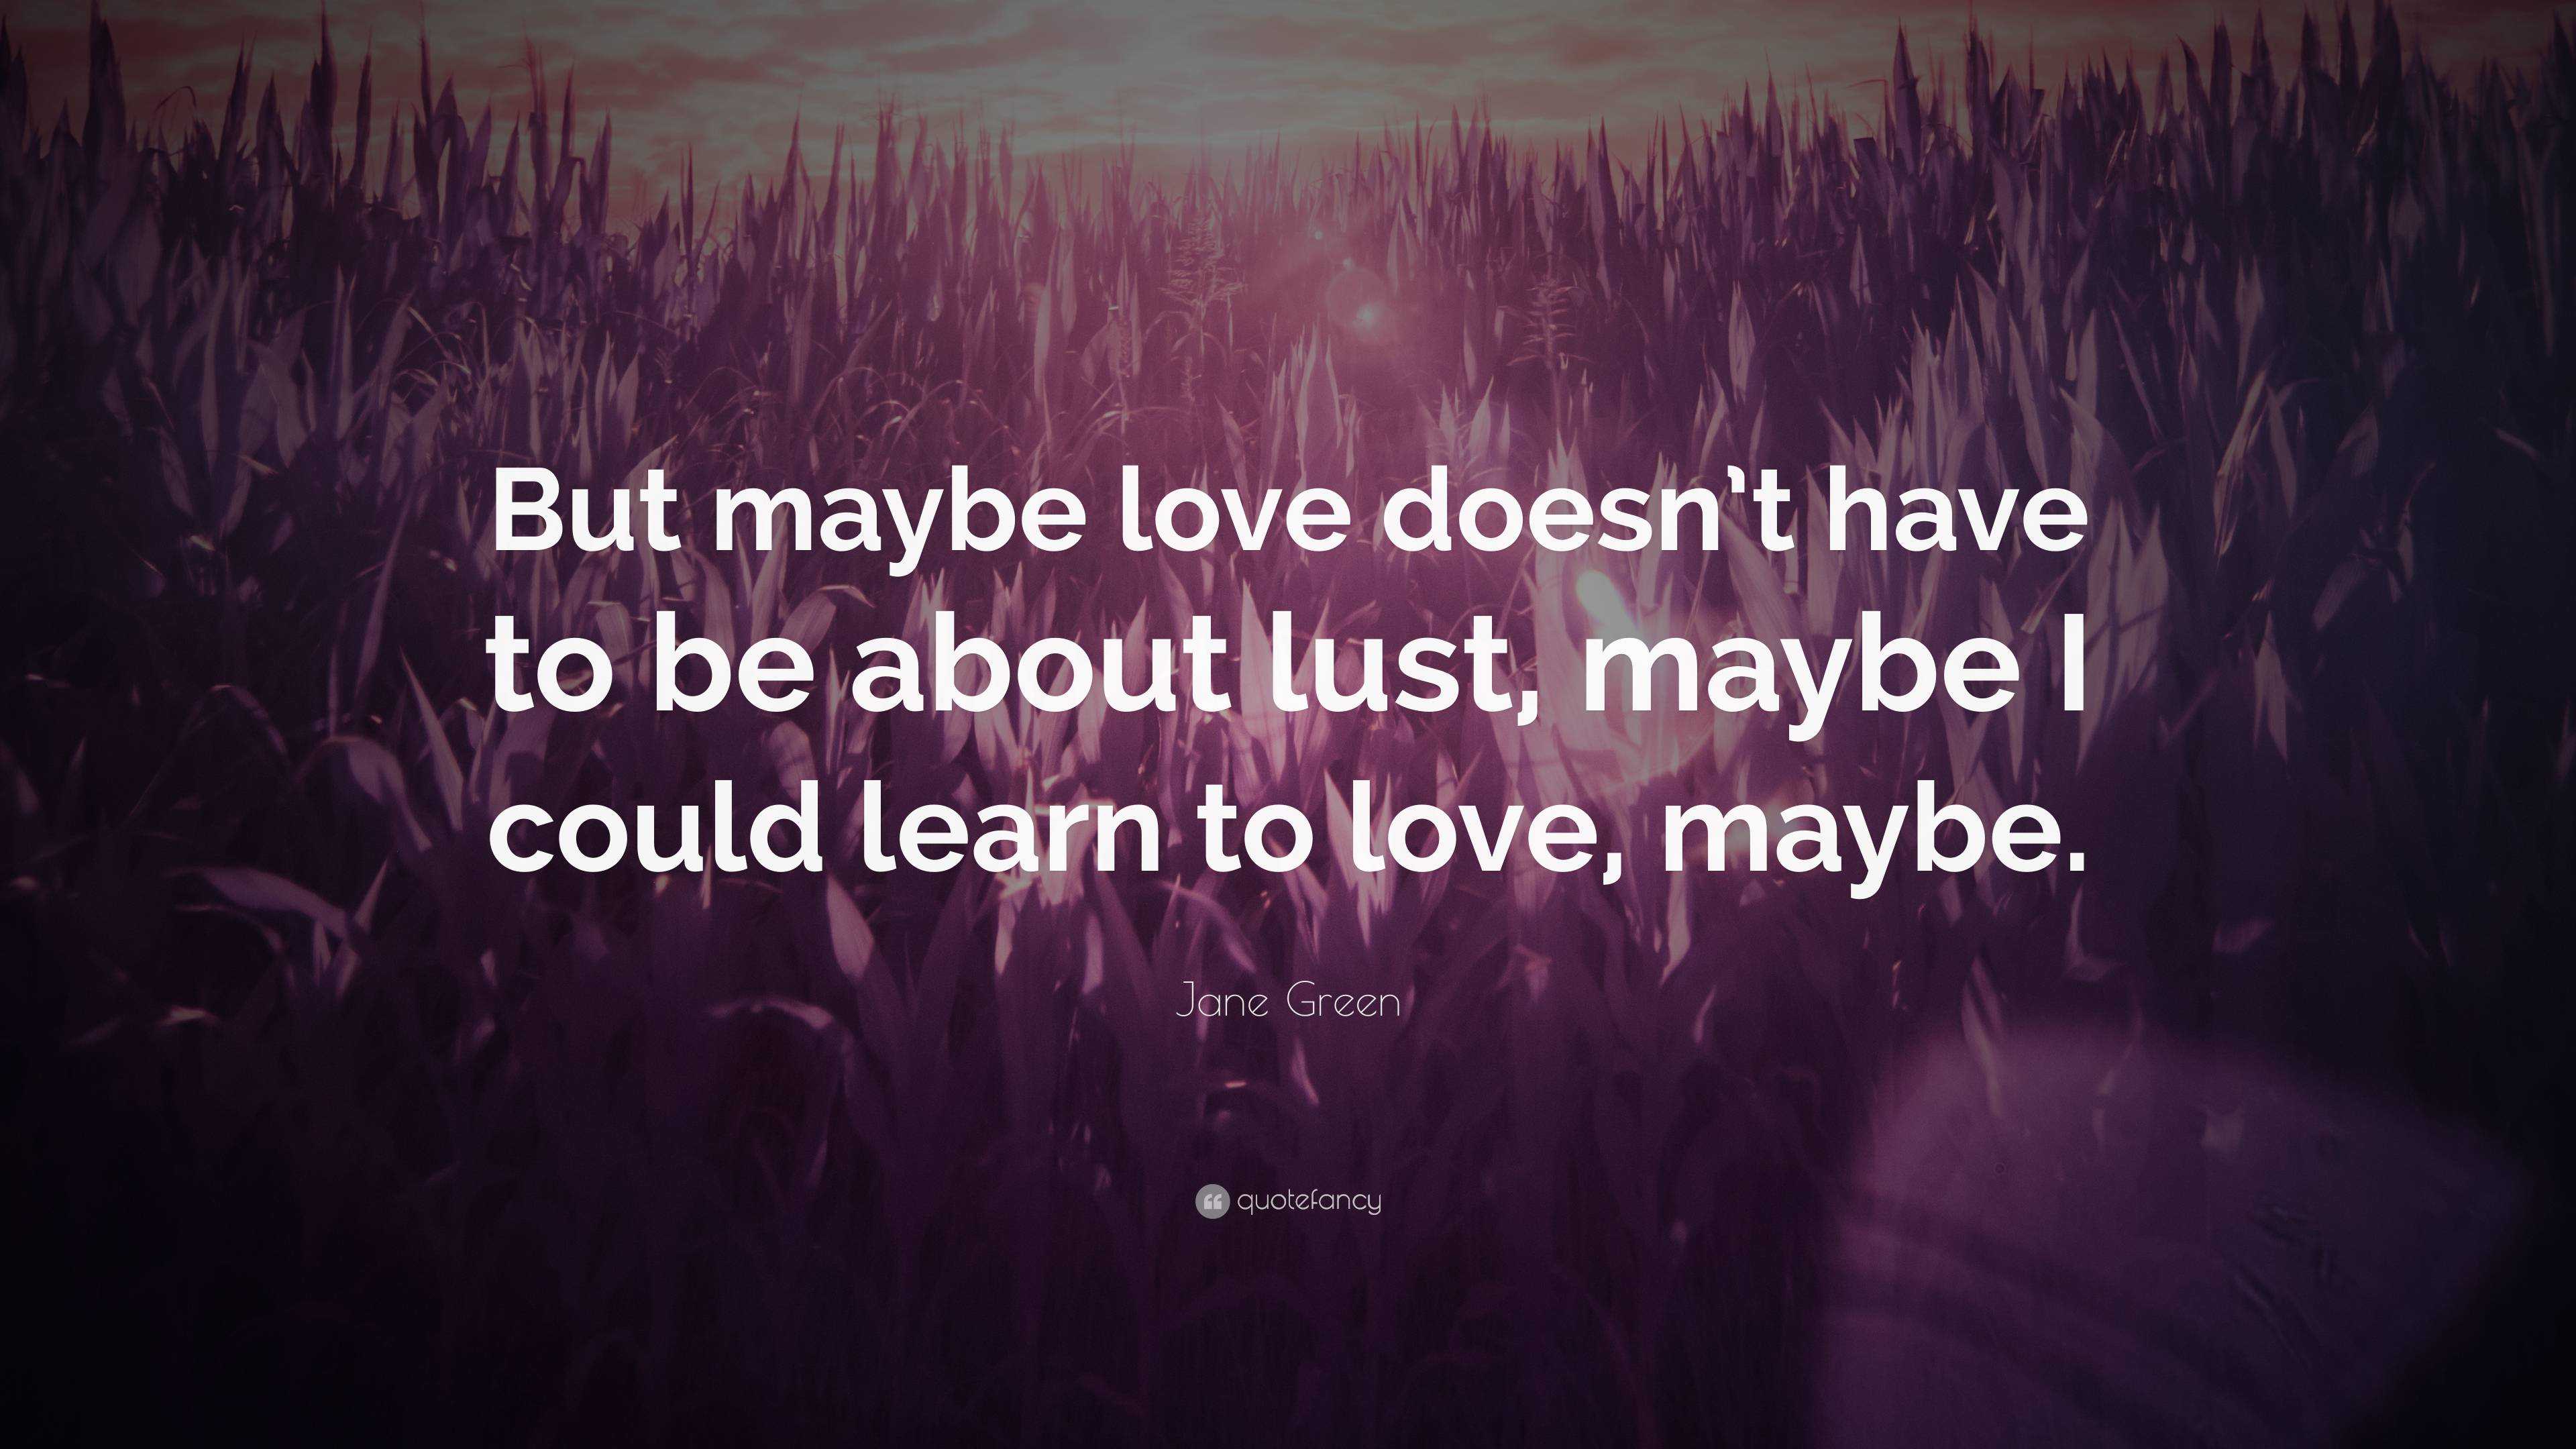 Jane Green Quote: “But maybe love doesn’t have to be about lust, maybe ...